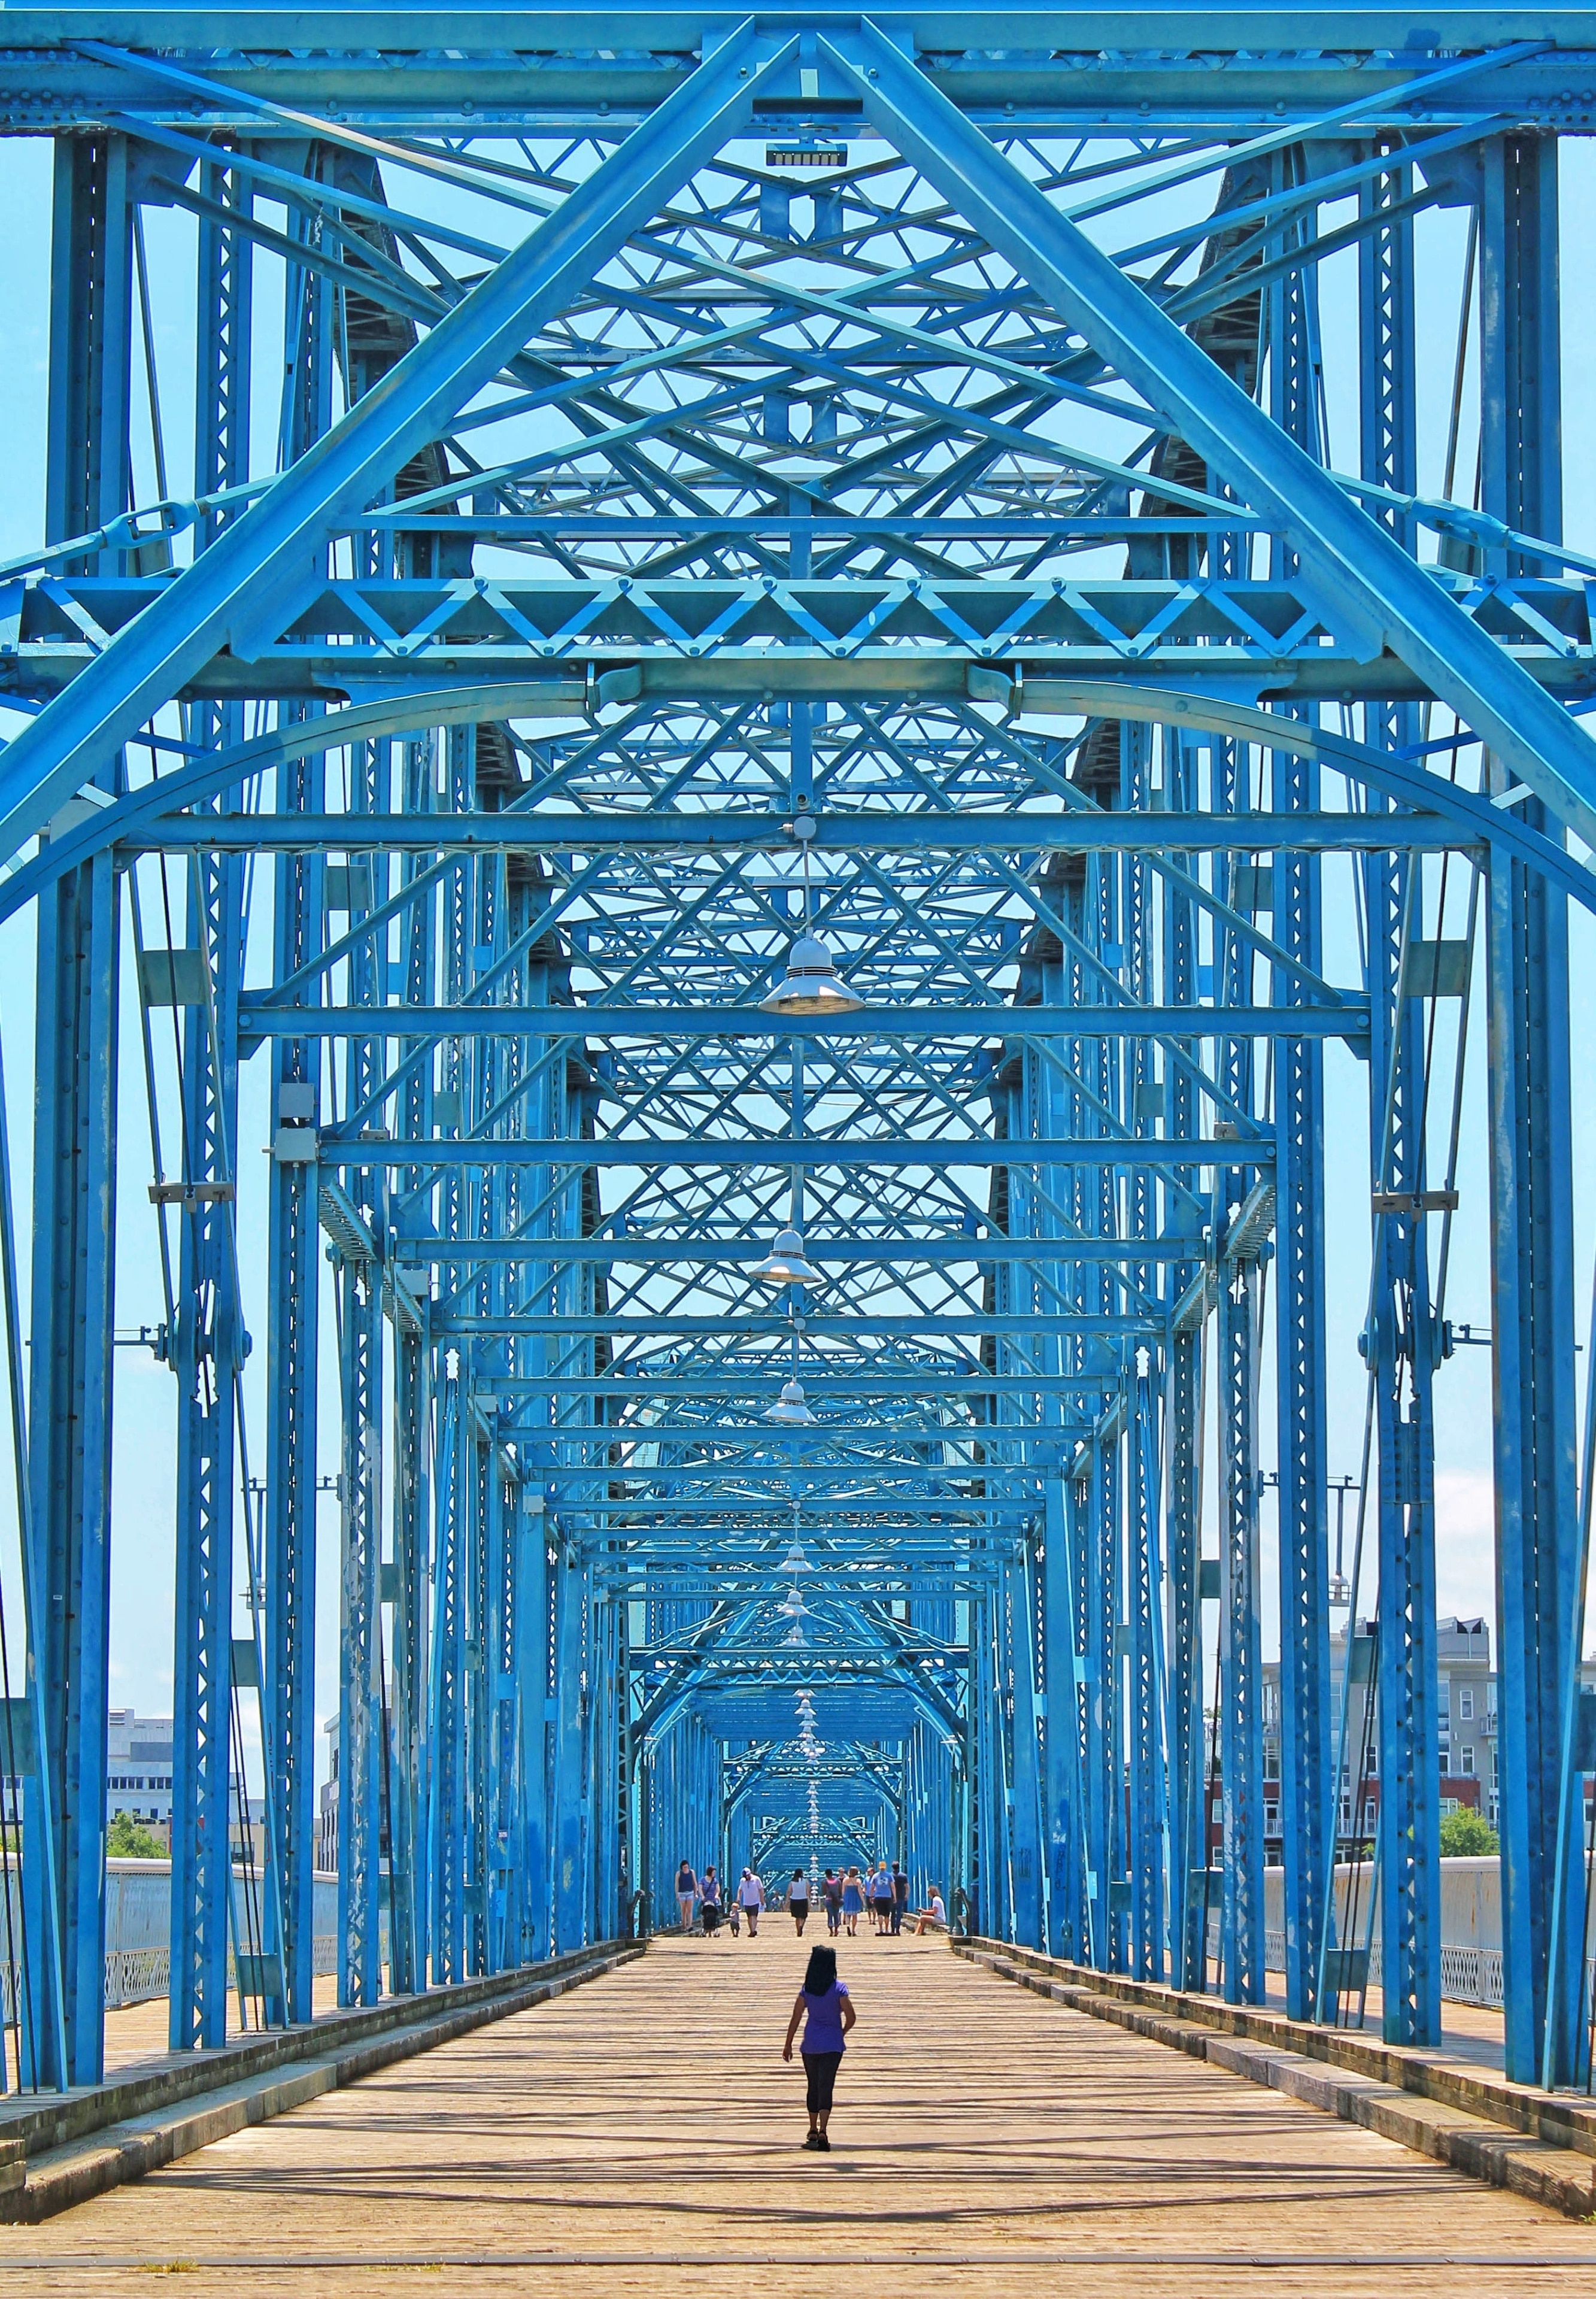 The Walnut Street Bridge is a wonderful way to cross the Tennessee River by foot or bike. The breeze that hits your face as you walk, makes it oh so refreshing and the views --- so pretty no matter which way you look! 

Built in 1890, this Bridge is one of the world's longest pedestrian bridge.  It connects downtown Chattanooga to the north shore. 